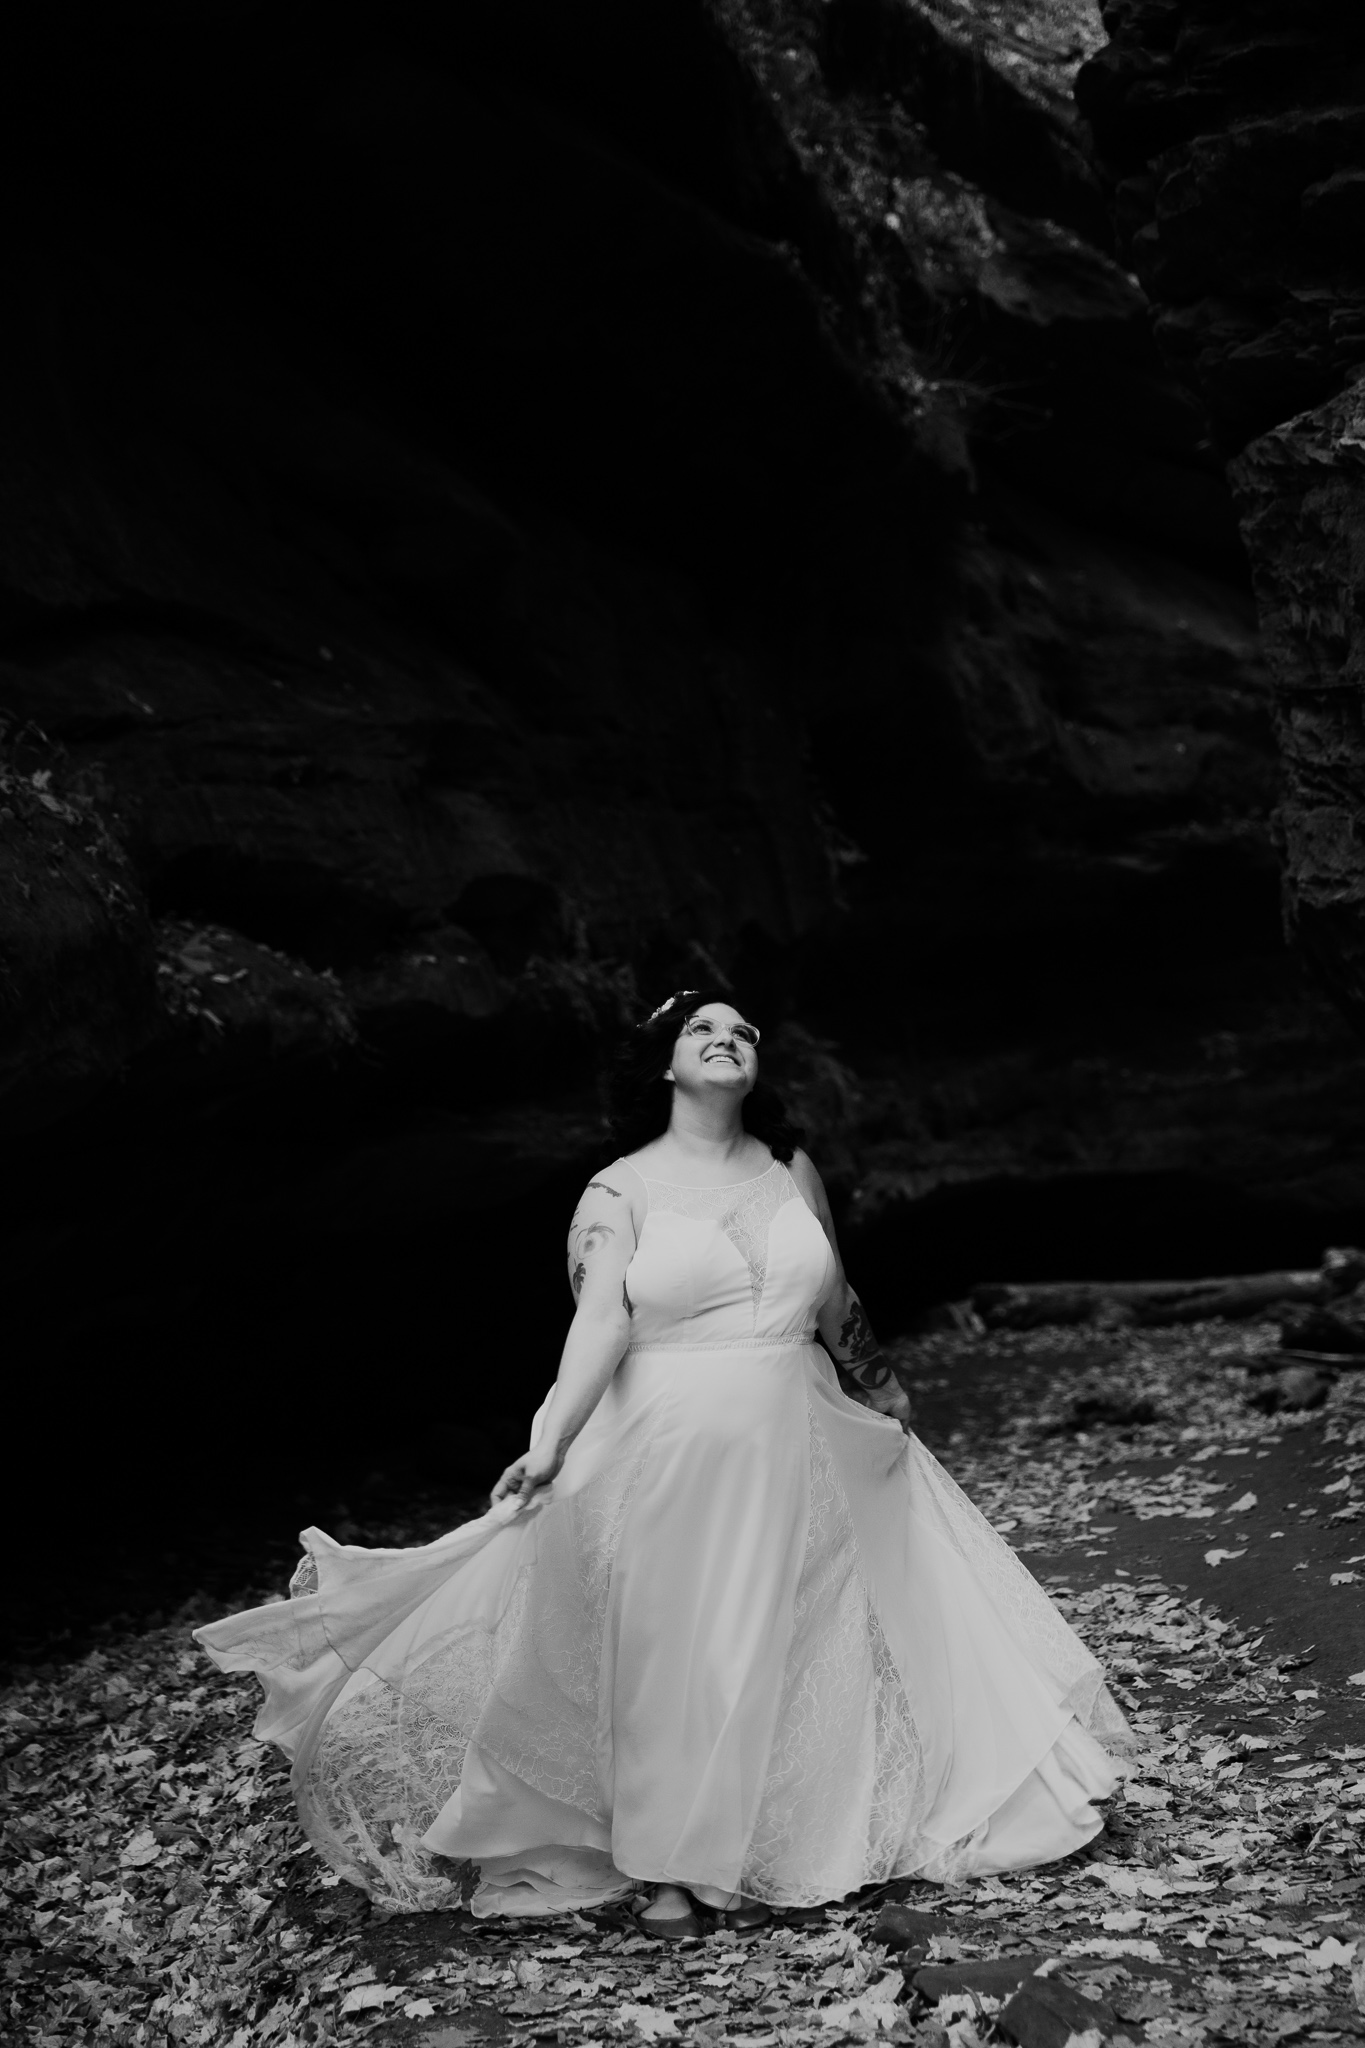 A bride dancing in fall leaves, within a canyon at Turkey Run State Park, Indiana